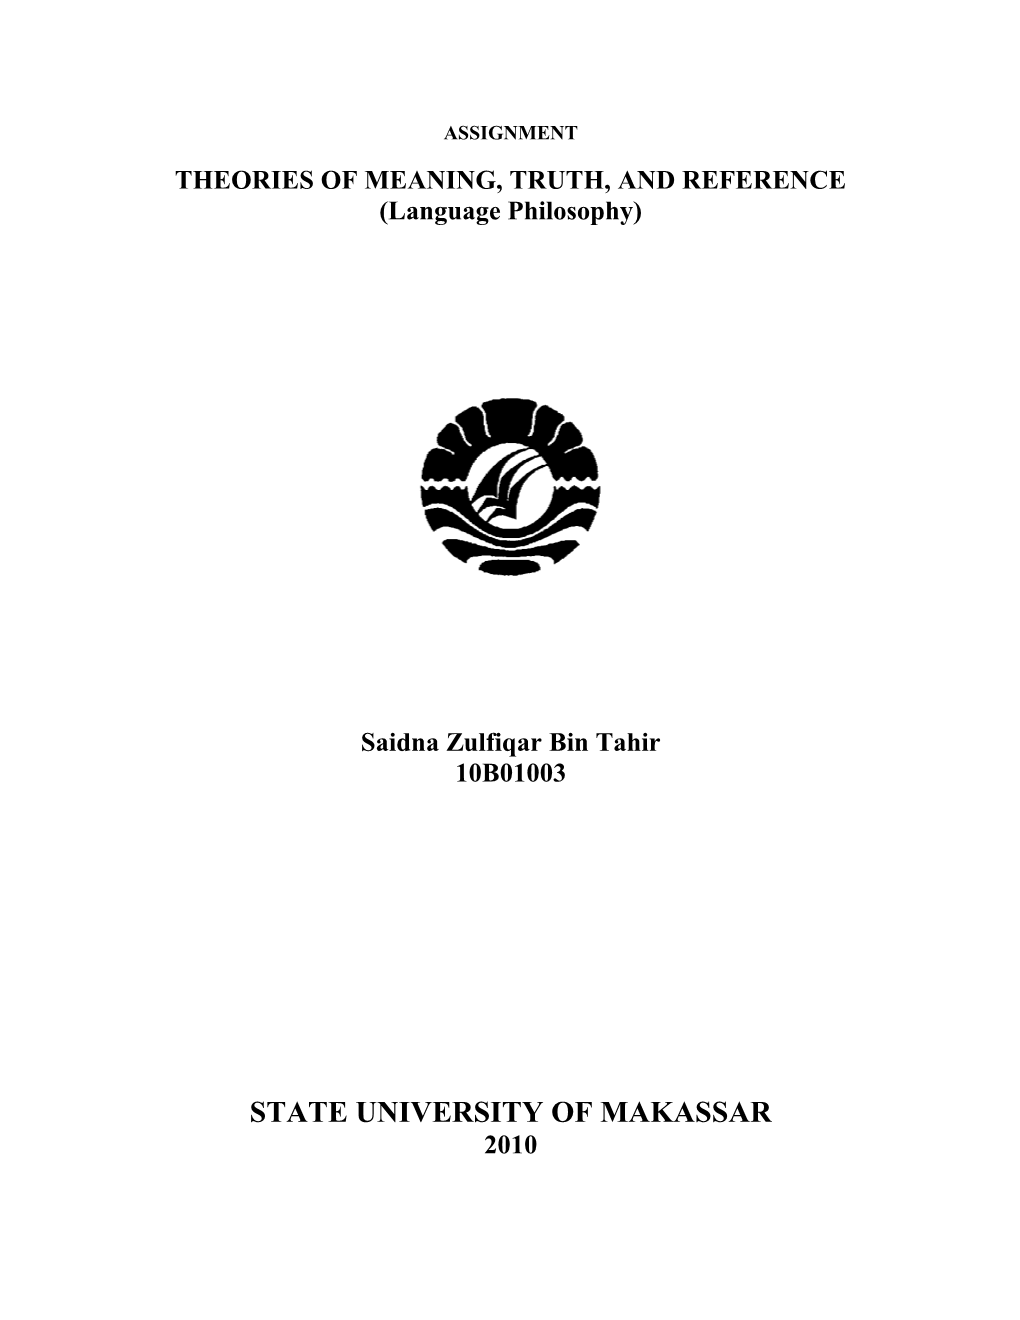 Theories of Meaning, Truth, and Reference